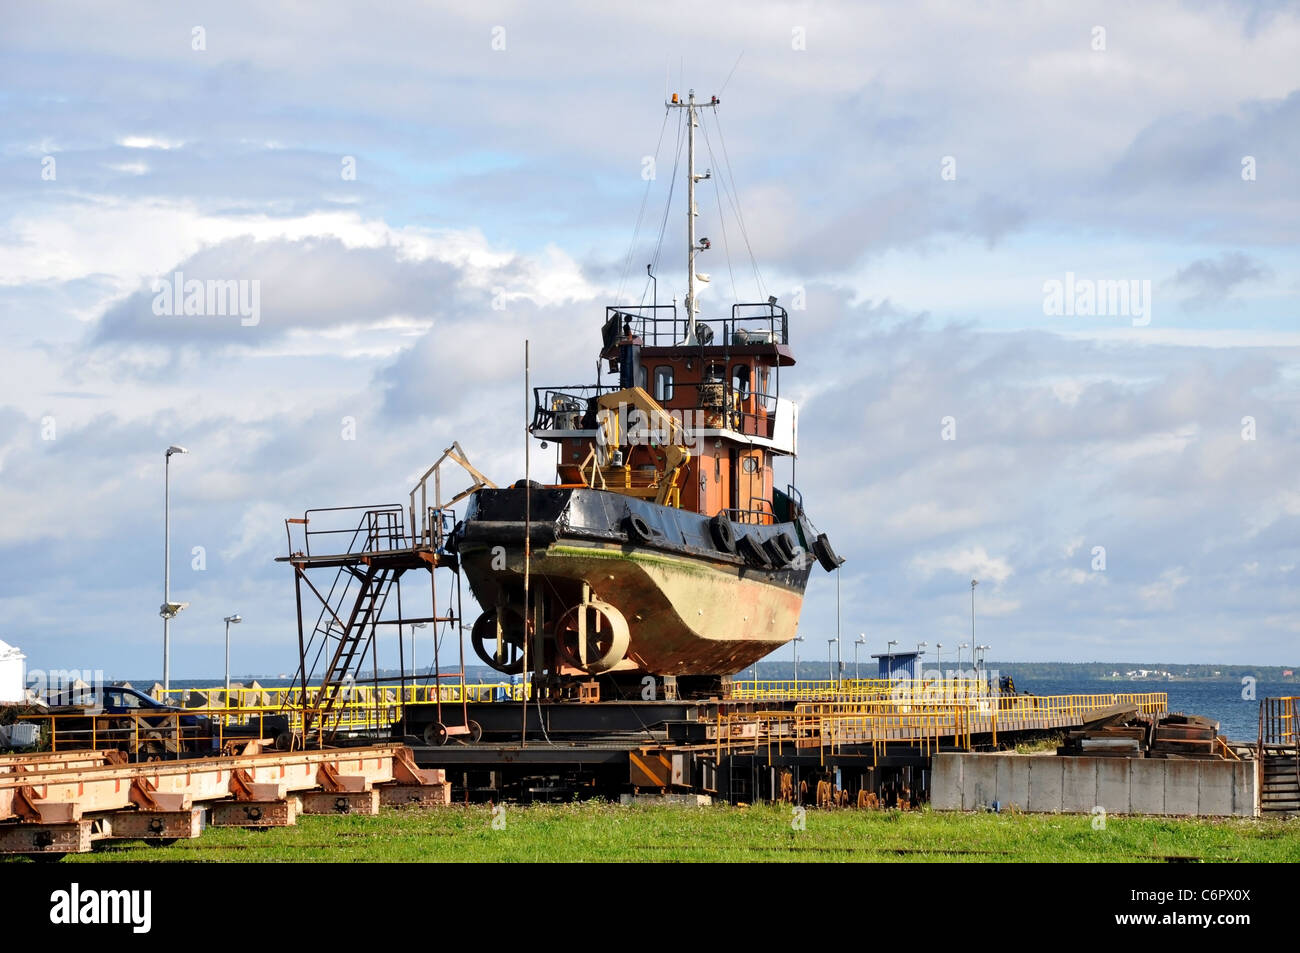 The small marine vessel is lifted from water on a building berth Stock Photo